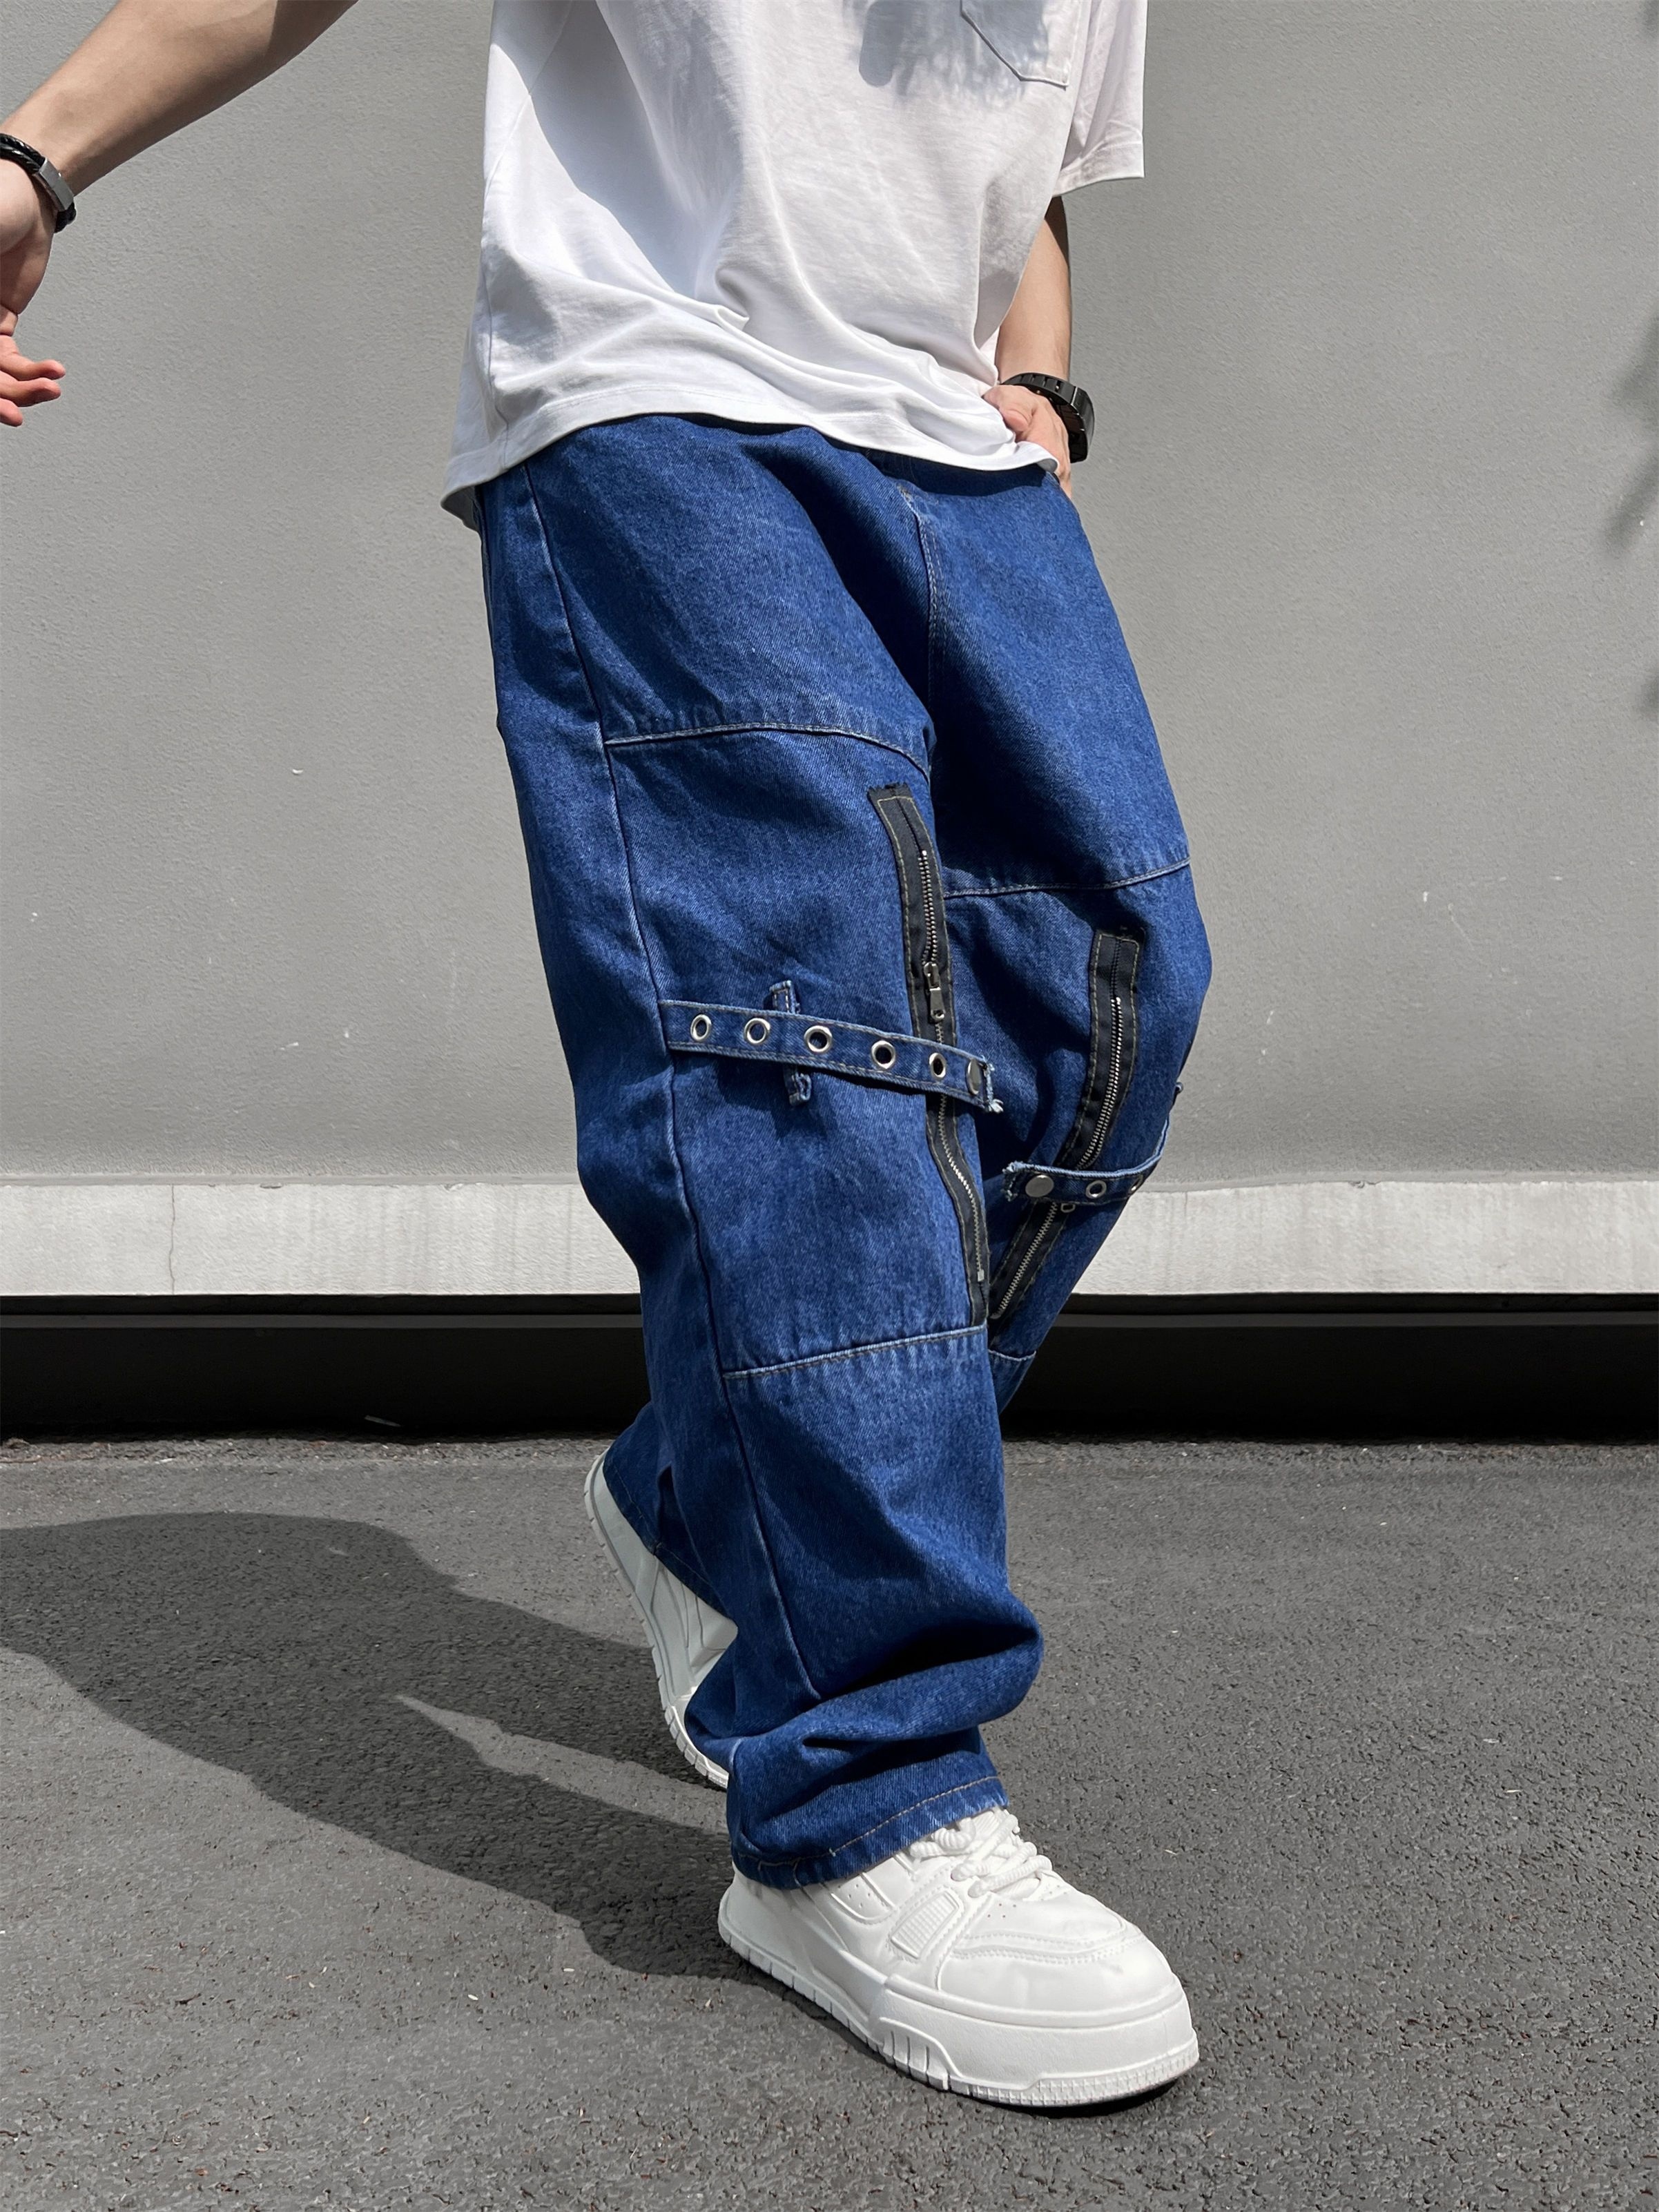 Vintage Cargo Pants Overalls Baggy Jeans, Women Casual Fashion Y2K Kpop  Vintage Style Streetwear, Big Pockets High Waist Straight Denim Trousers,  Wome